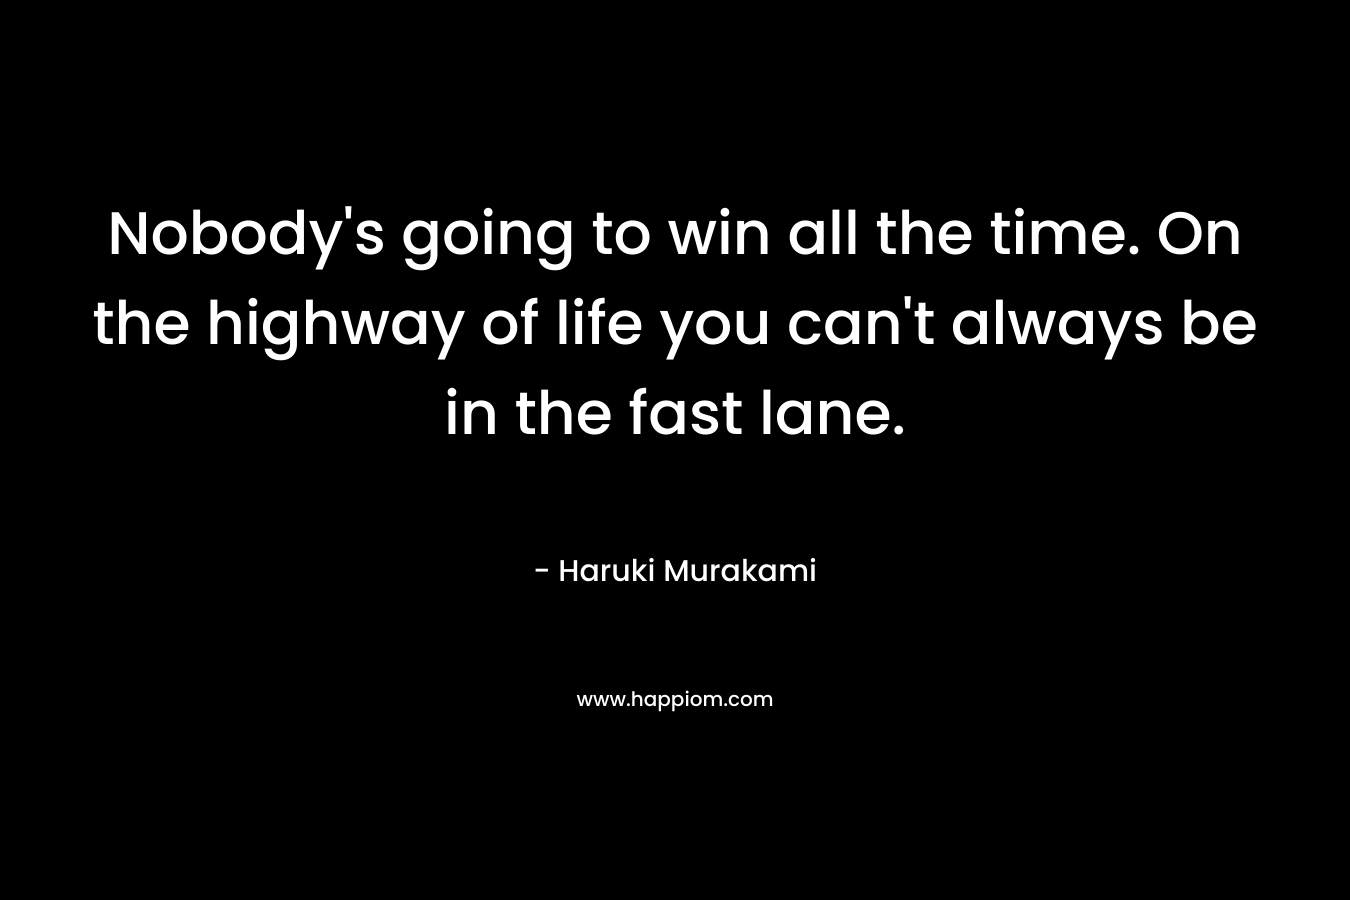 Nobody’s going to win all the time. On the highway of life you can’t always be in the fast lane. – Haruki Murakami